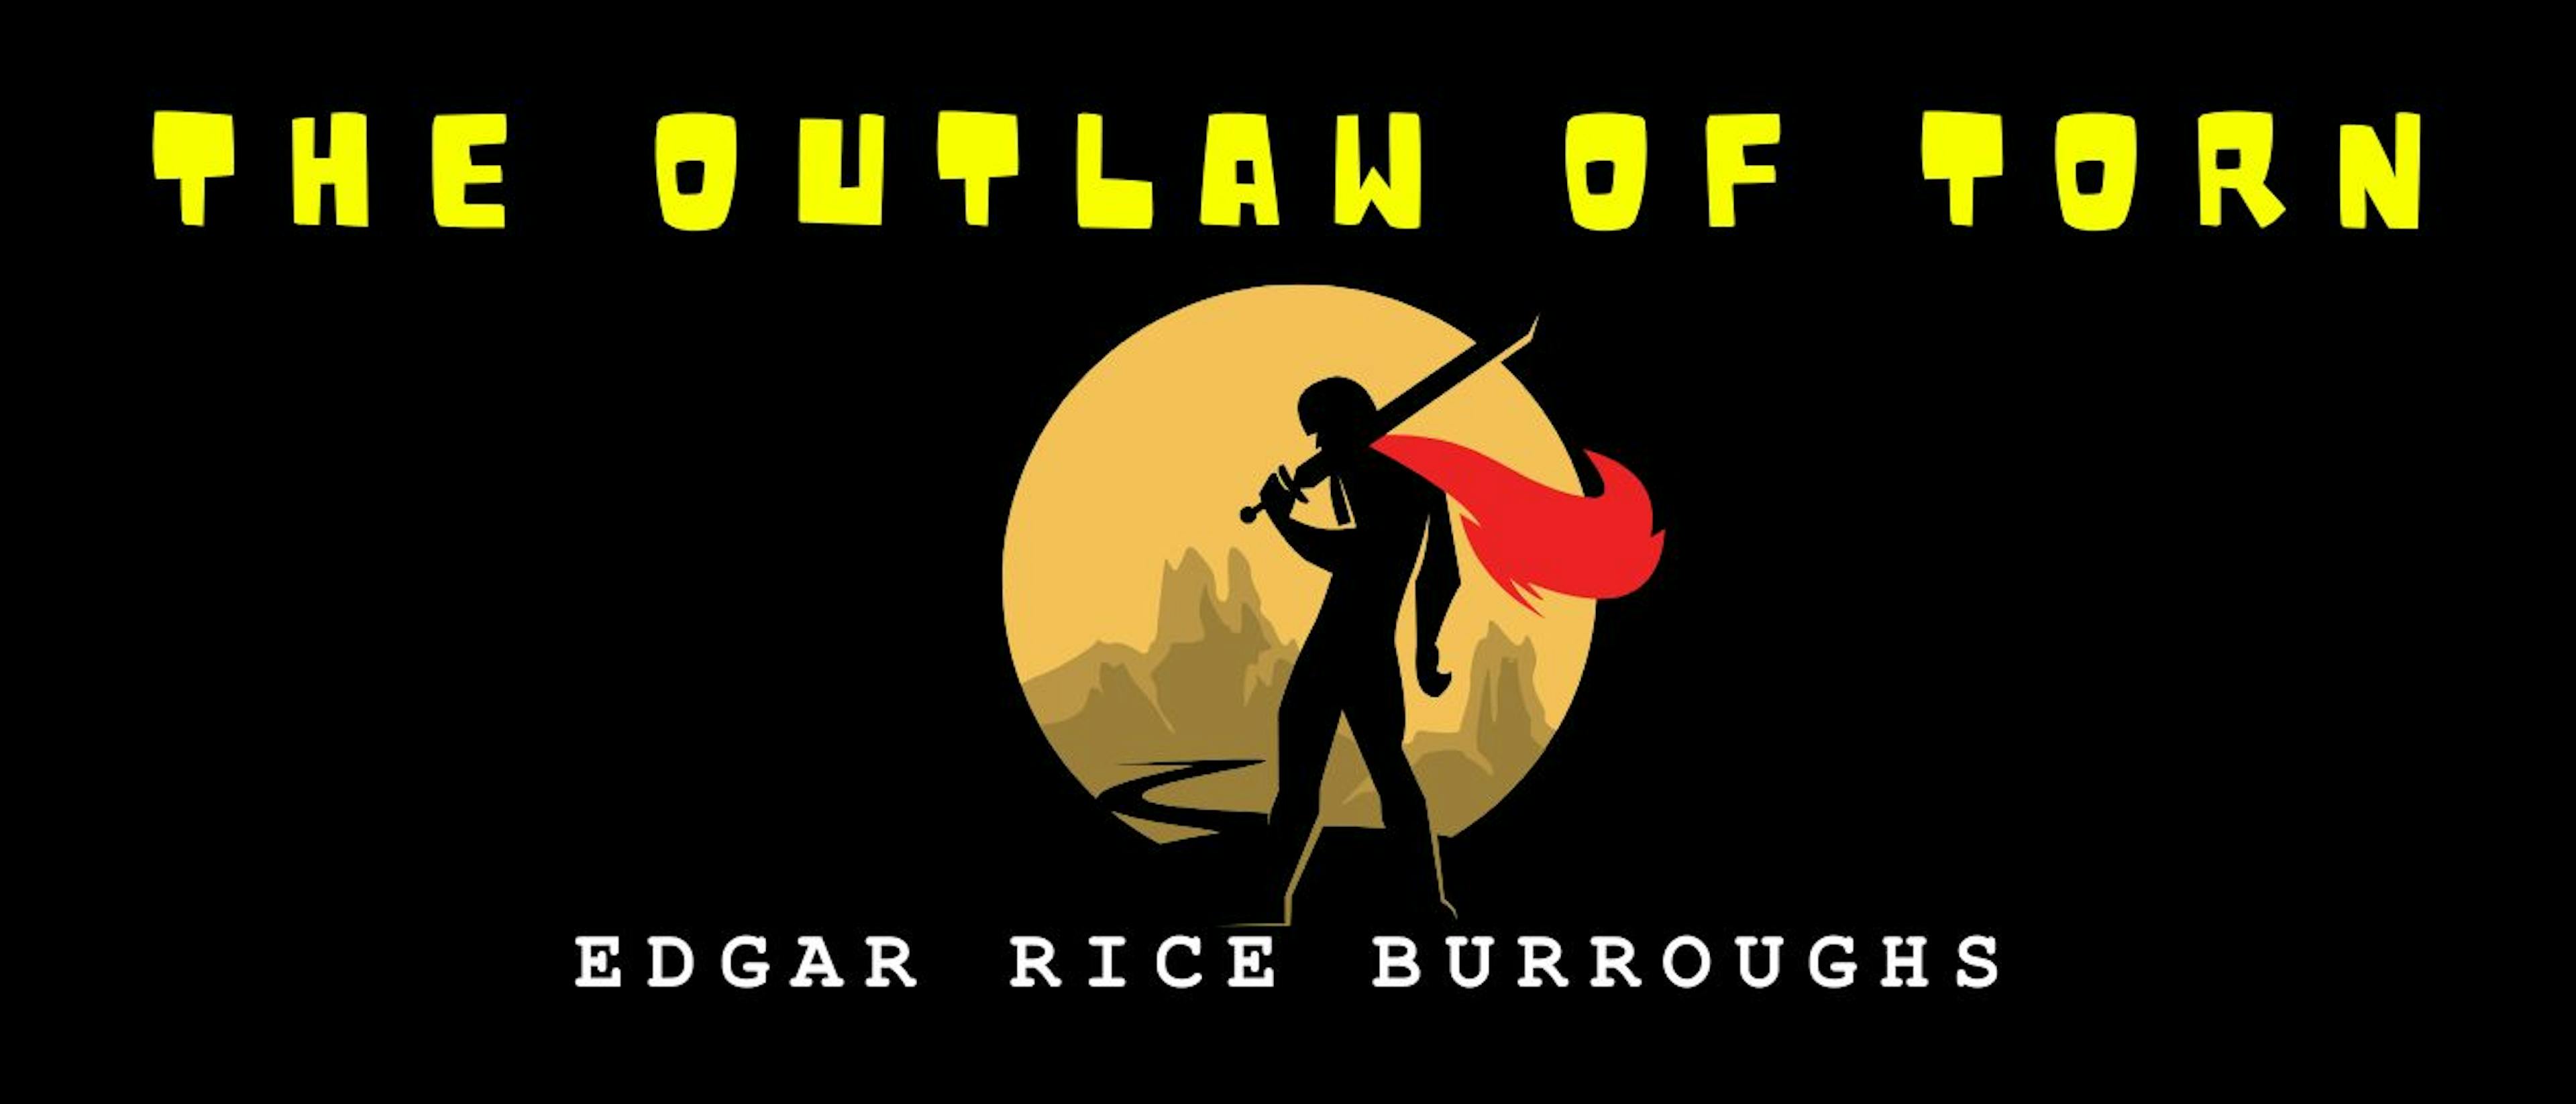 featured image - The Outlaw of Torn by Edgar Rice Burroughs - Table of Links